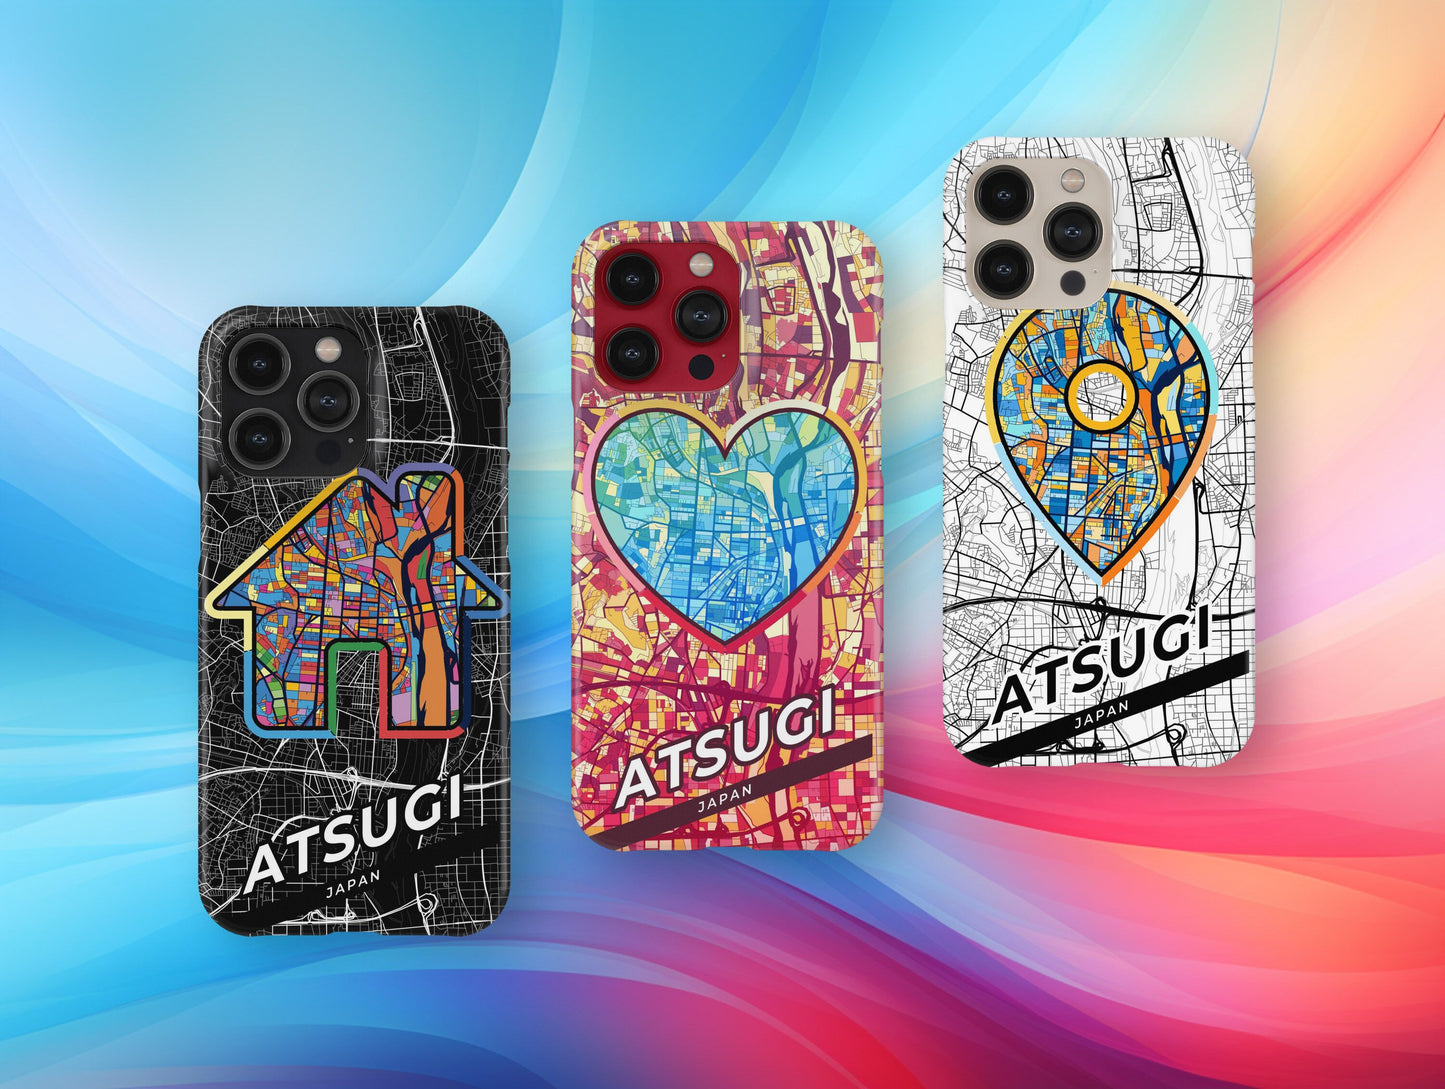 Atsugi Japan slim phone case with colorful icon. Birthday, wedding or housewarming gift. Couple match cases.